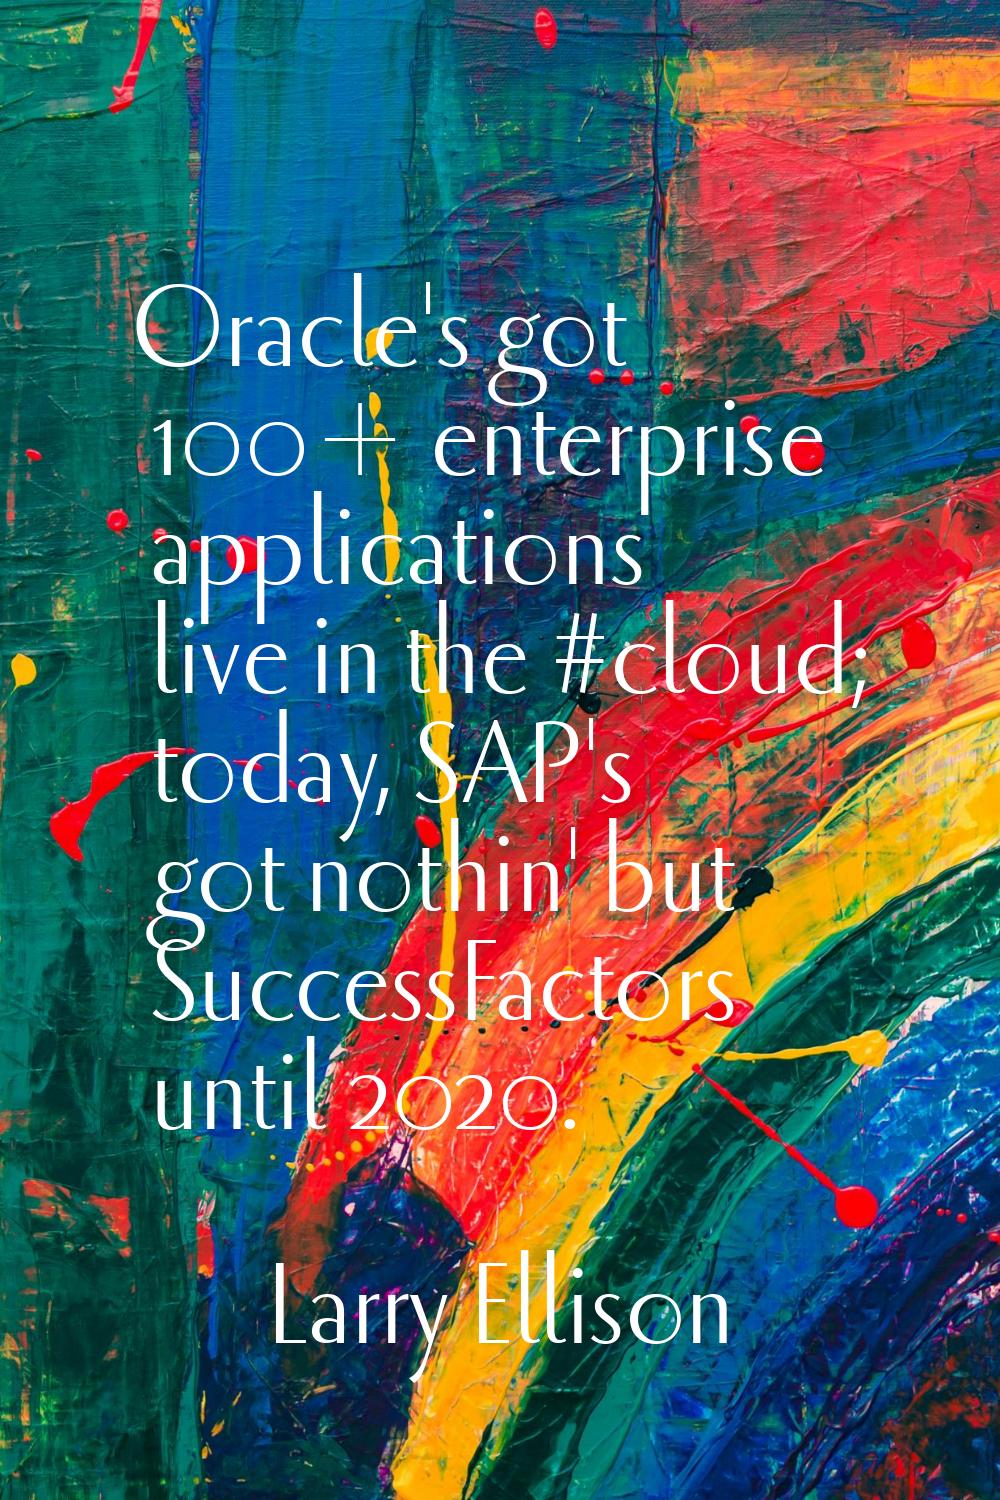 Oracle's got 100+ enterprise applications live in the #cloud; today, SAP's got nothin' but SuccessF